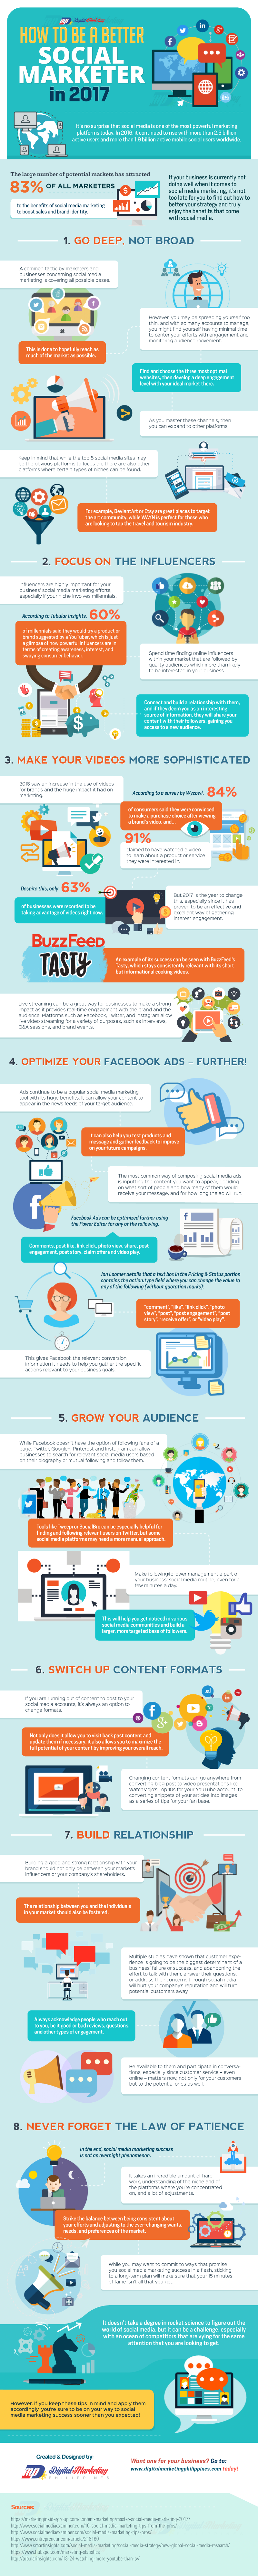 Become a Better Social Marketer [Infographic]